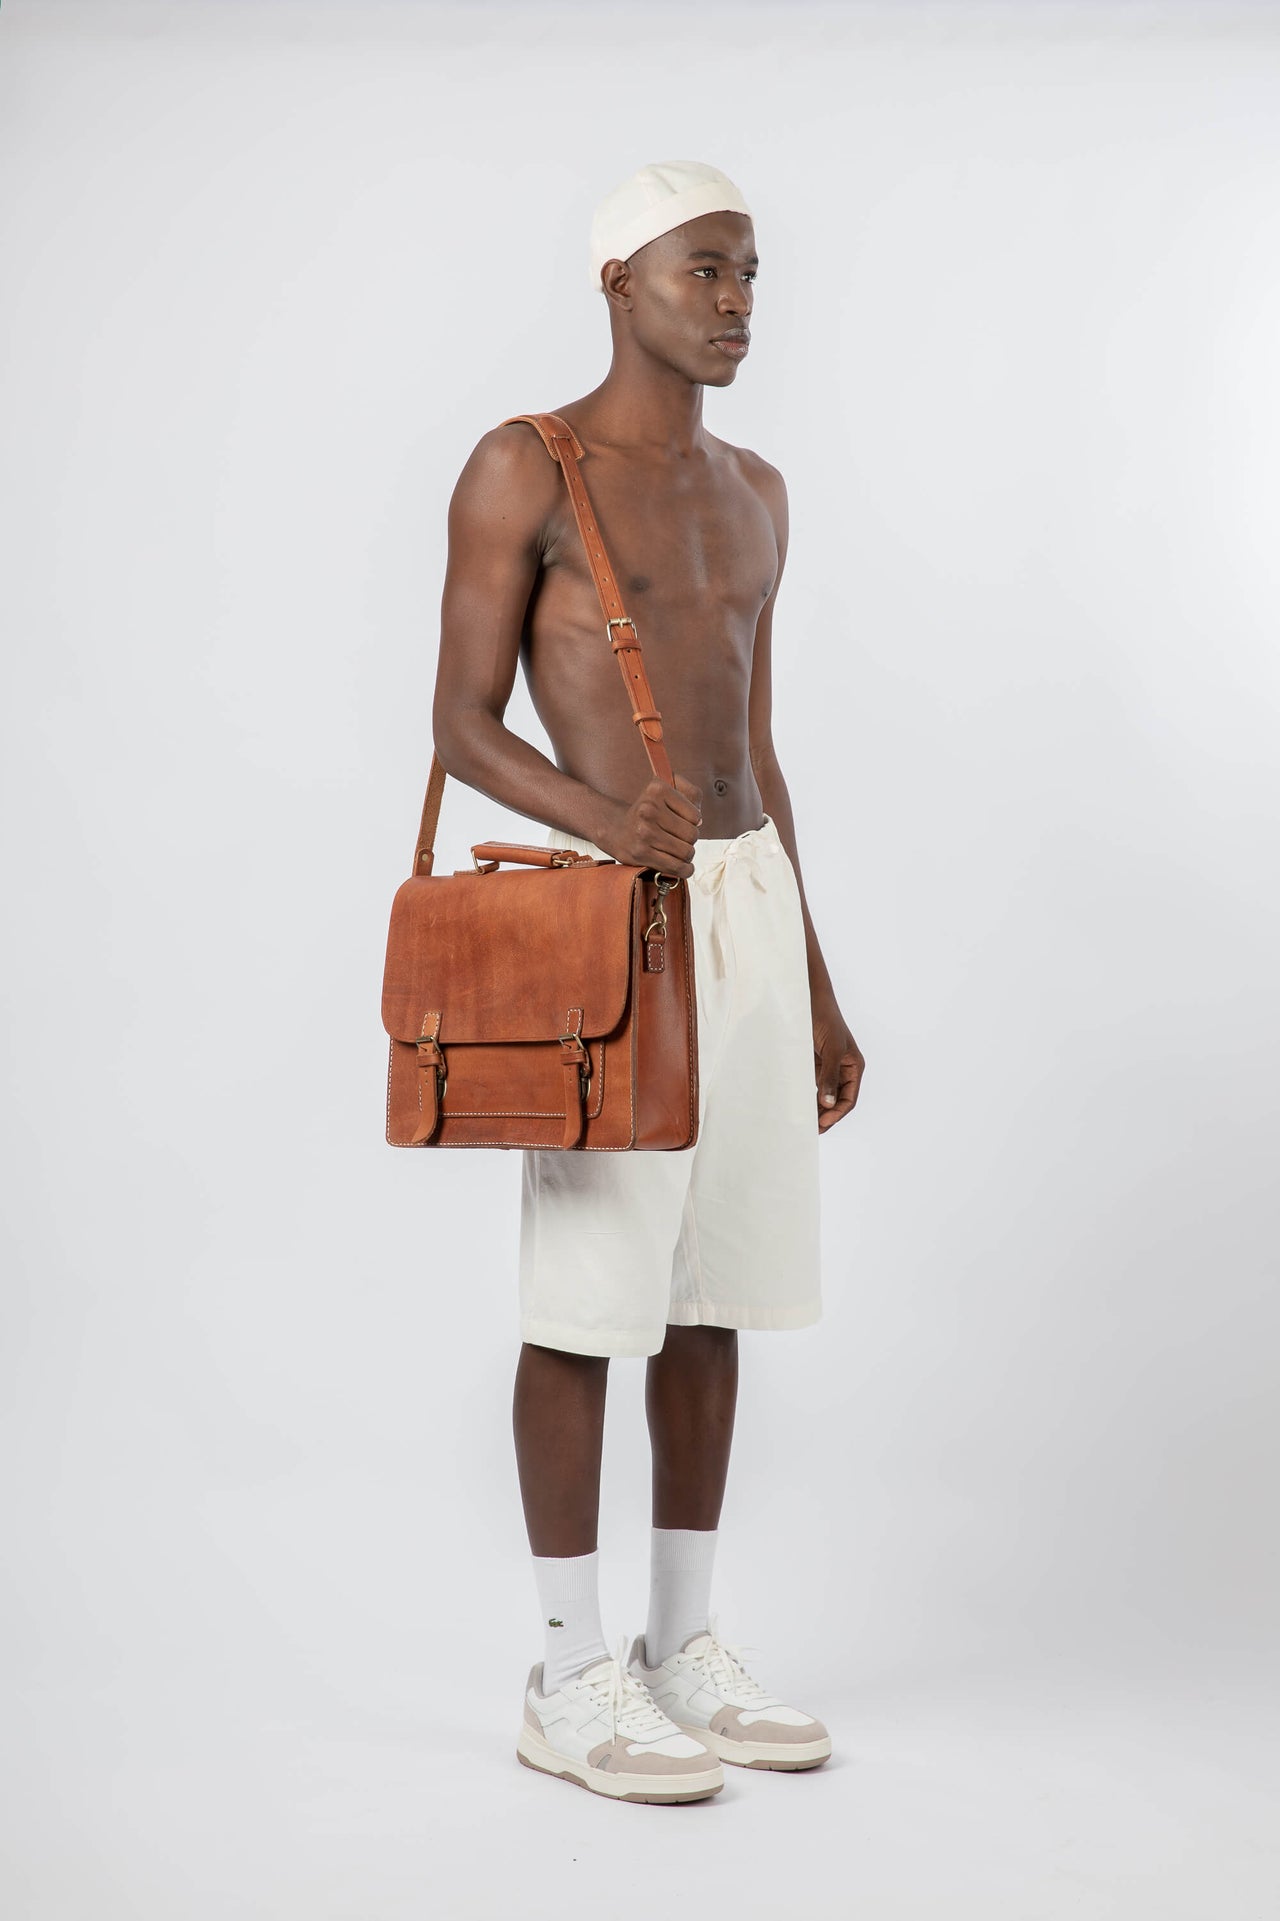 Urban Messenger Bag in Cognac Leather – AG Leather - Shop Leather